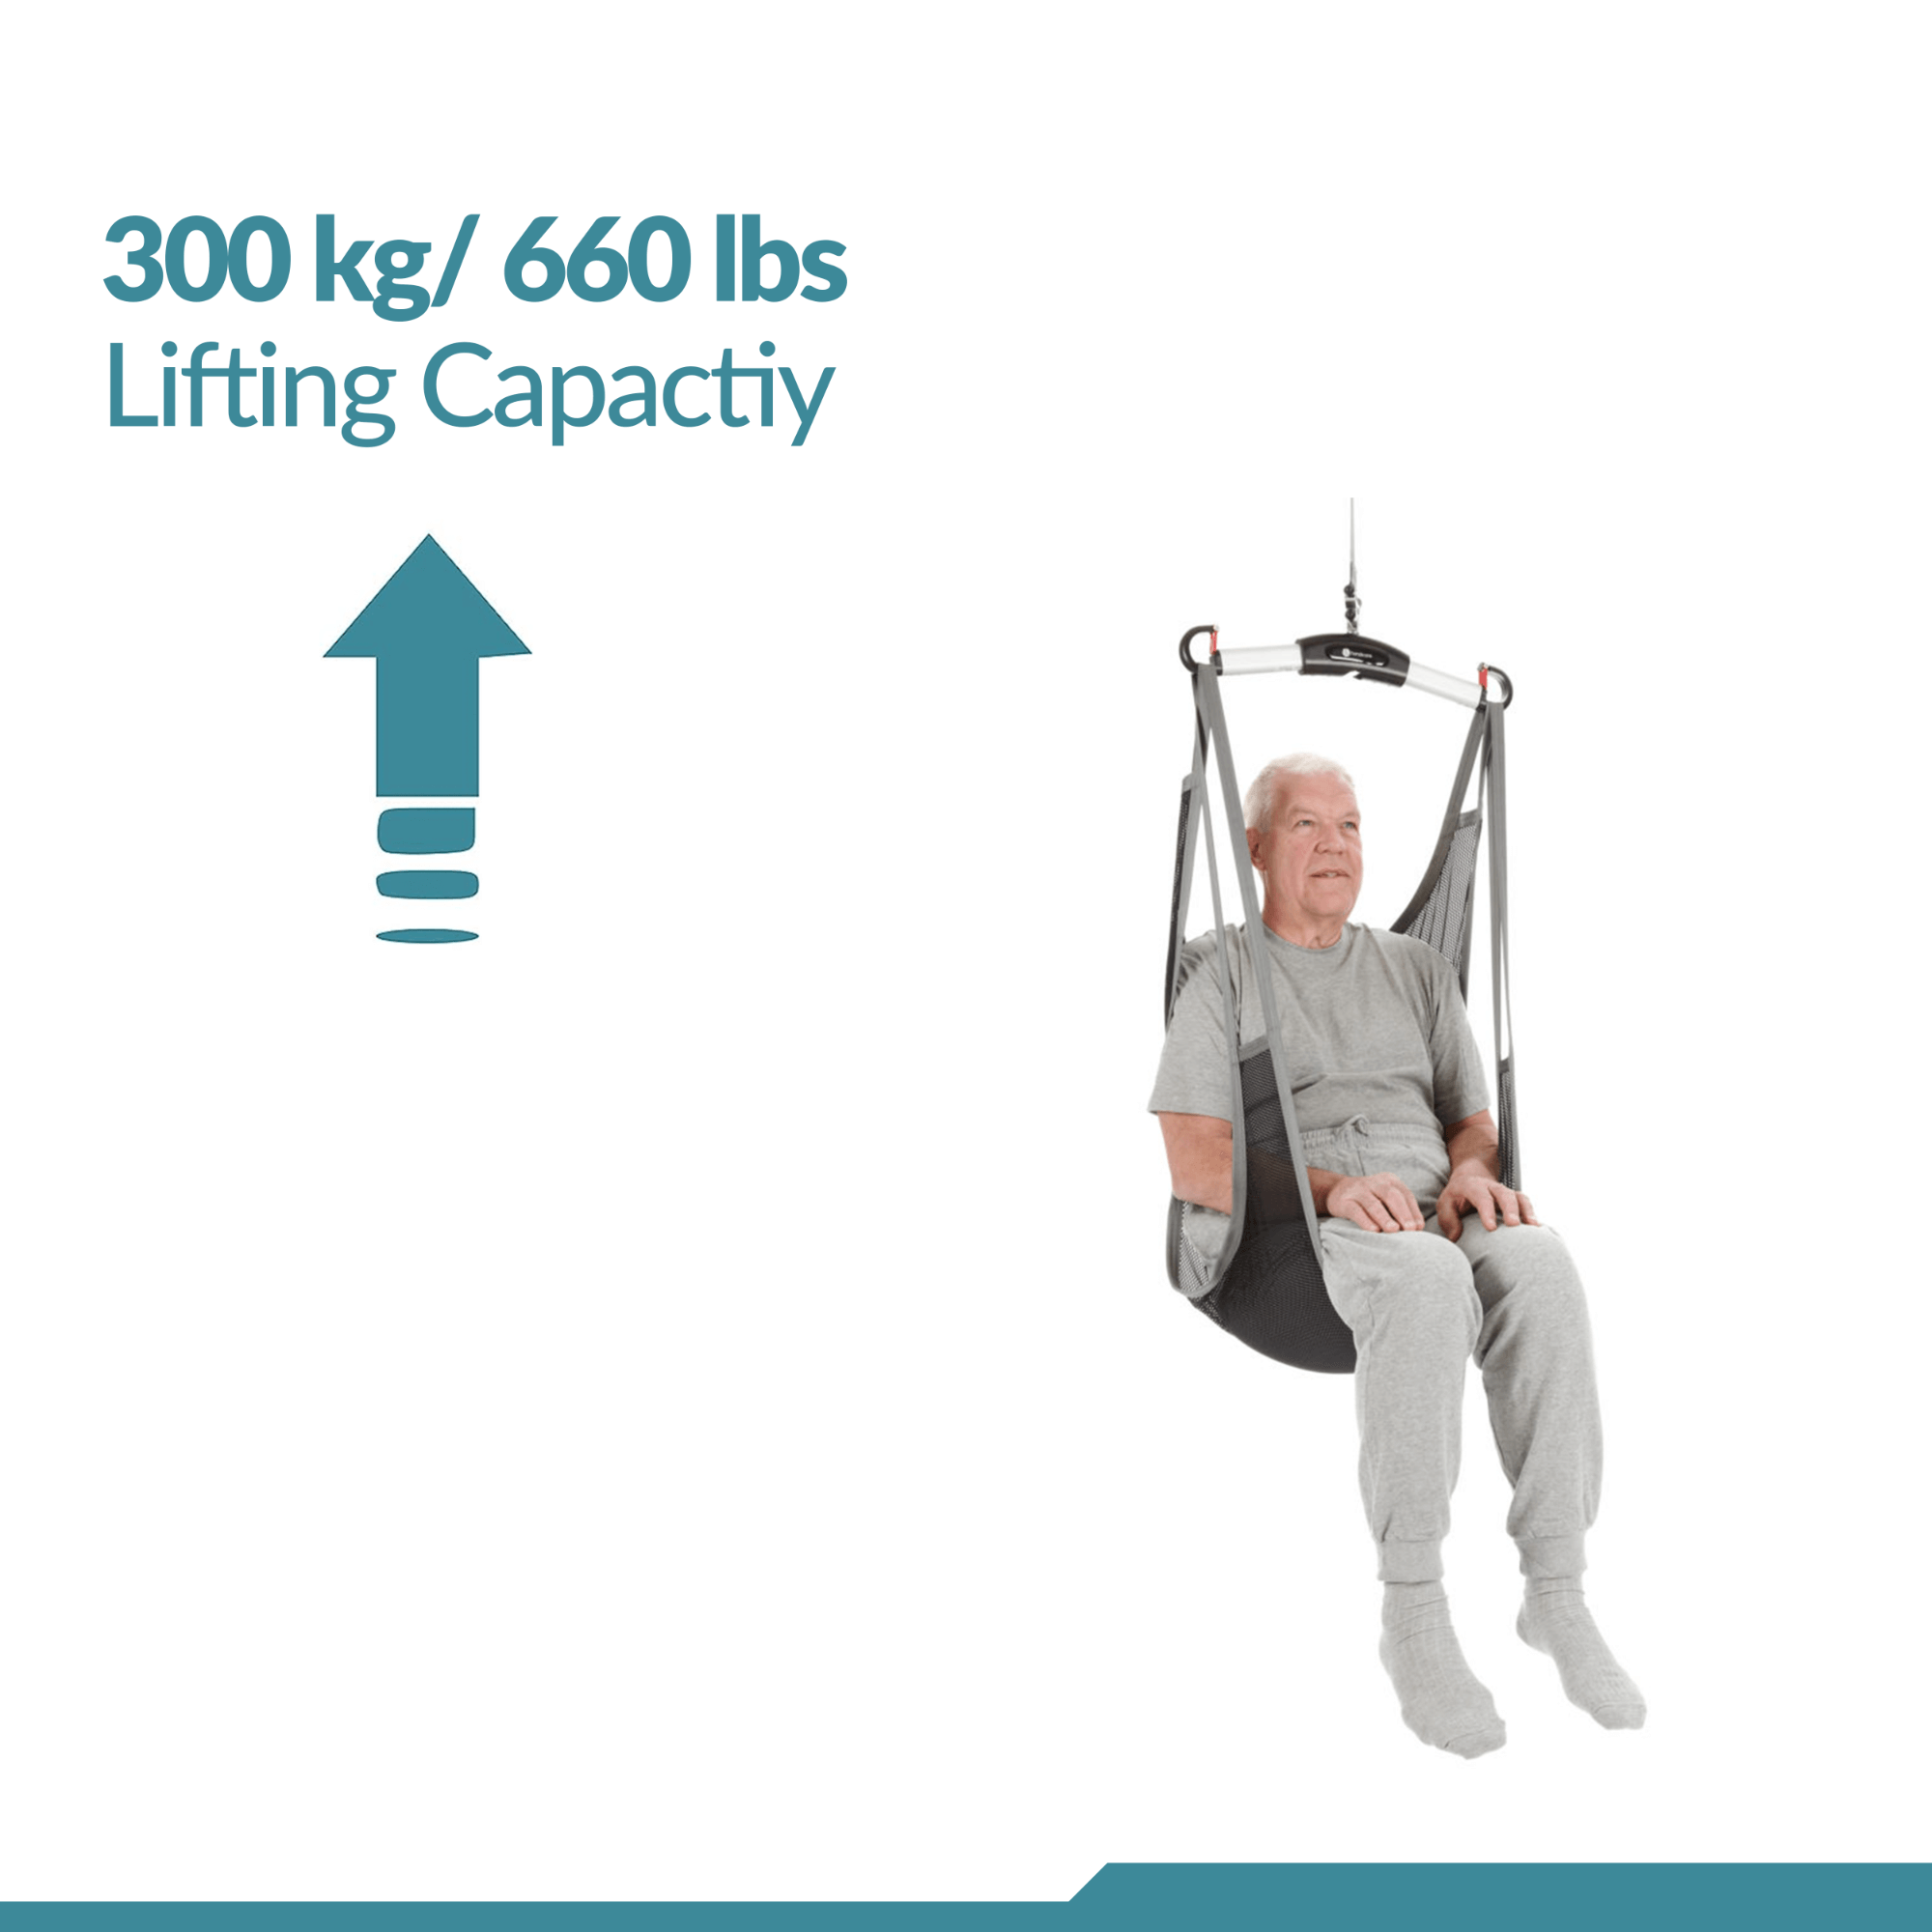 Standard Sling - Universal Patient Lift Sling for Lifts for Home Use - Transfer Safely with Patient Lifter - Compatible with Hoyer Lift - Easy-to-Use